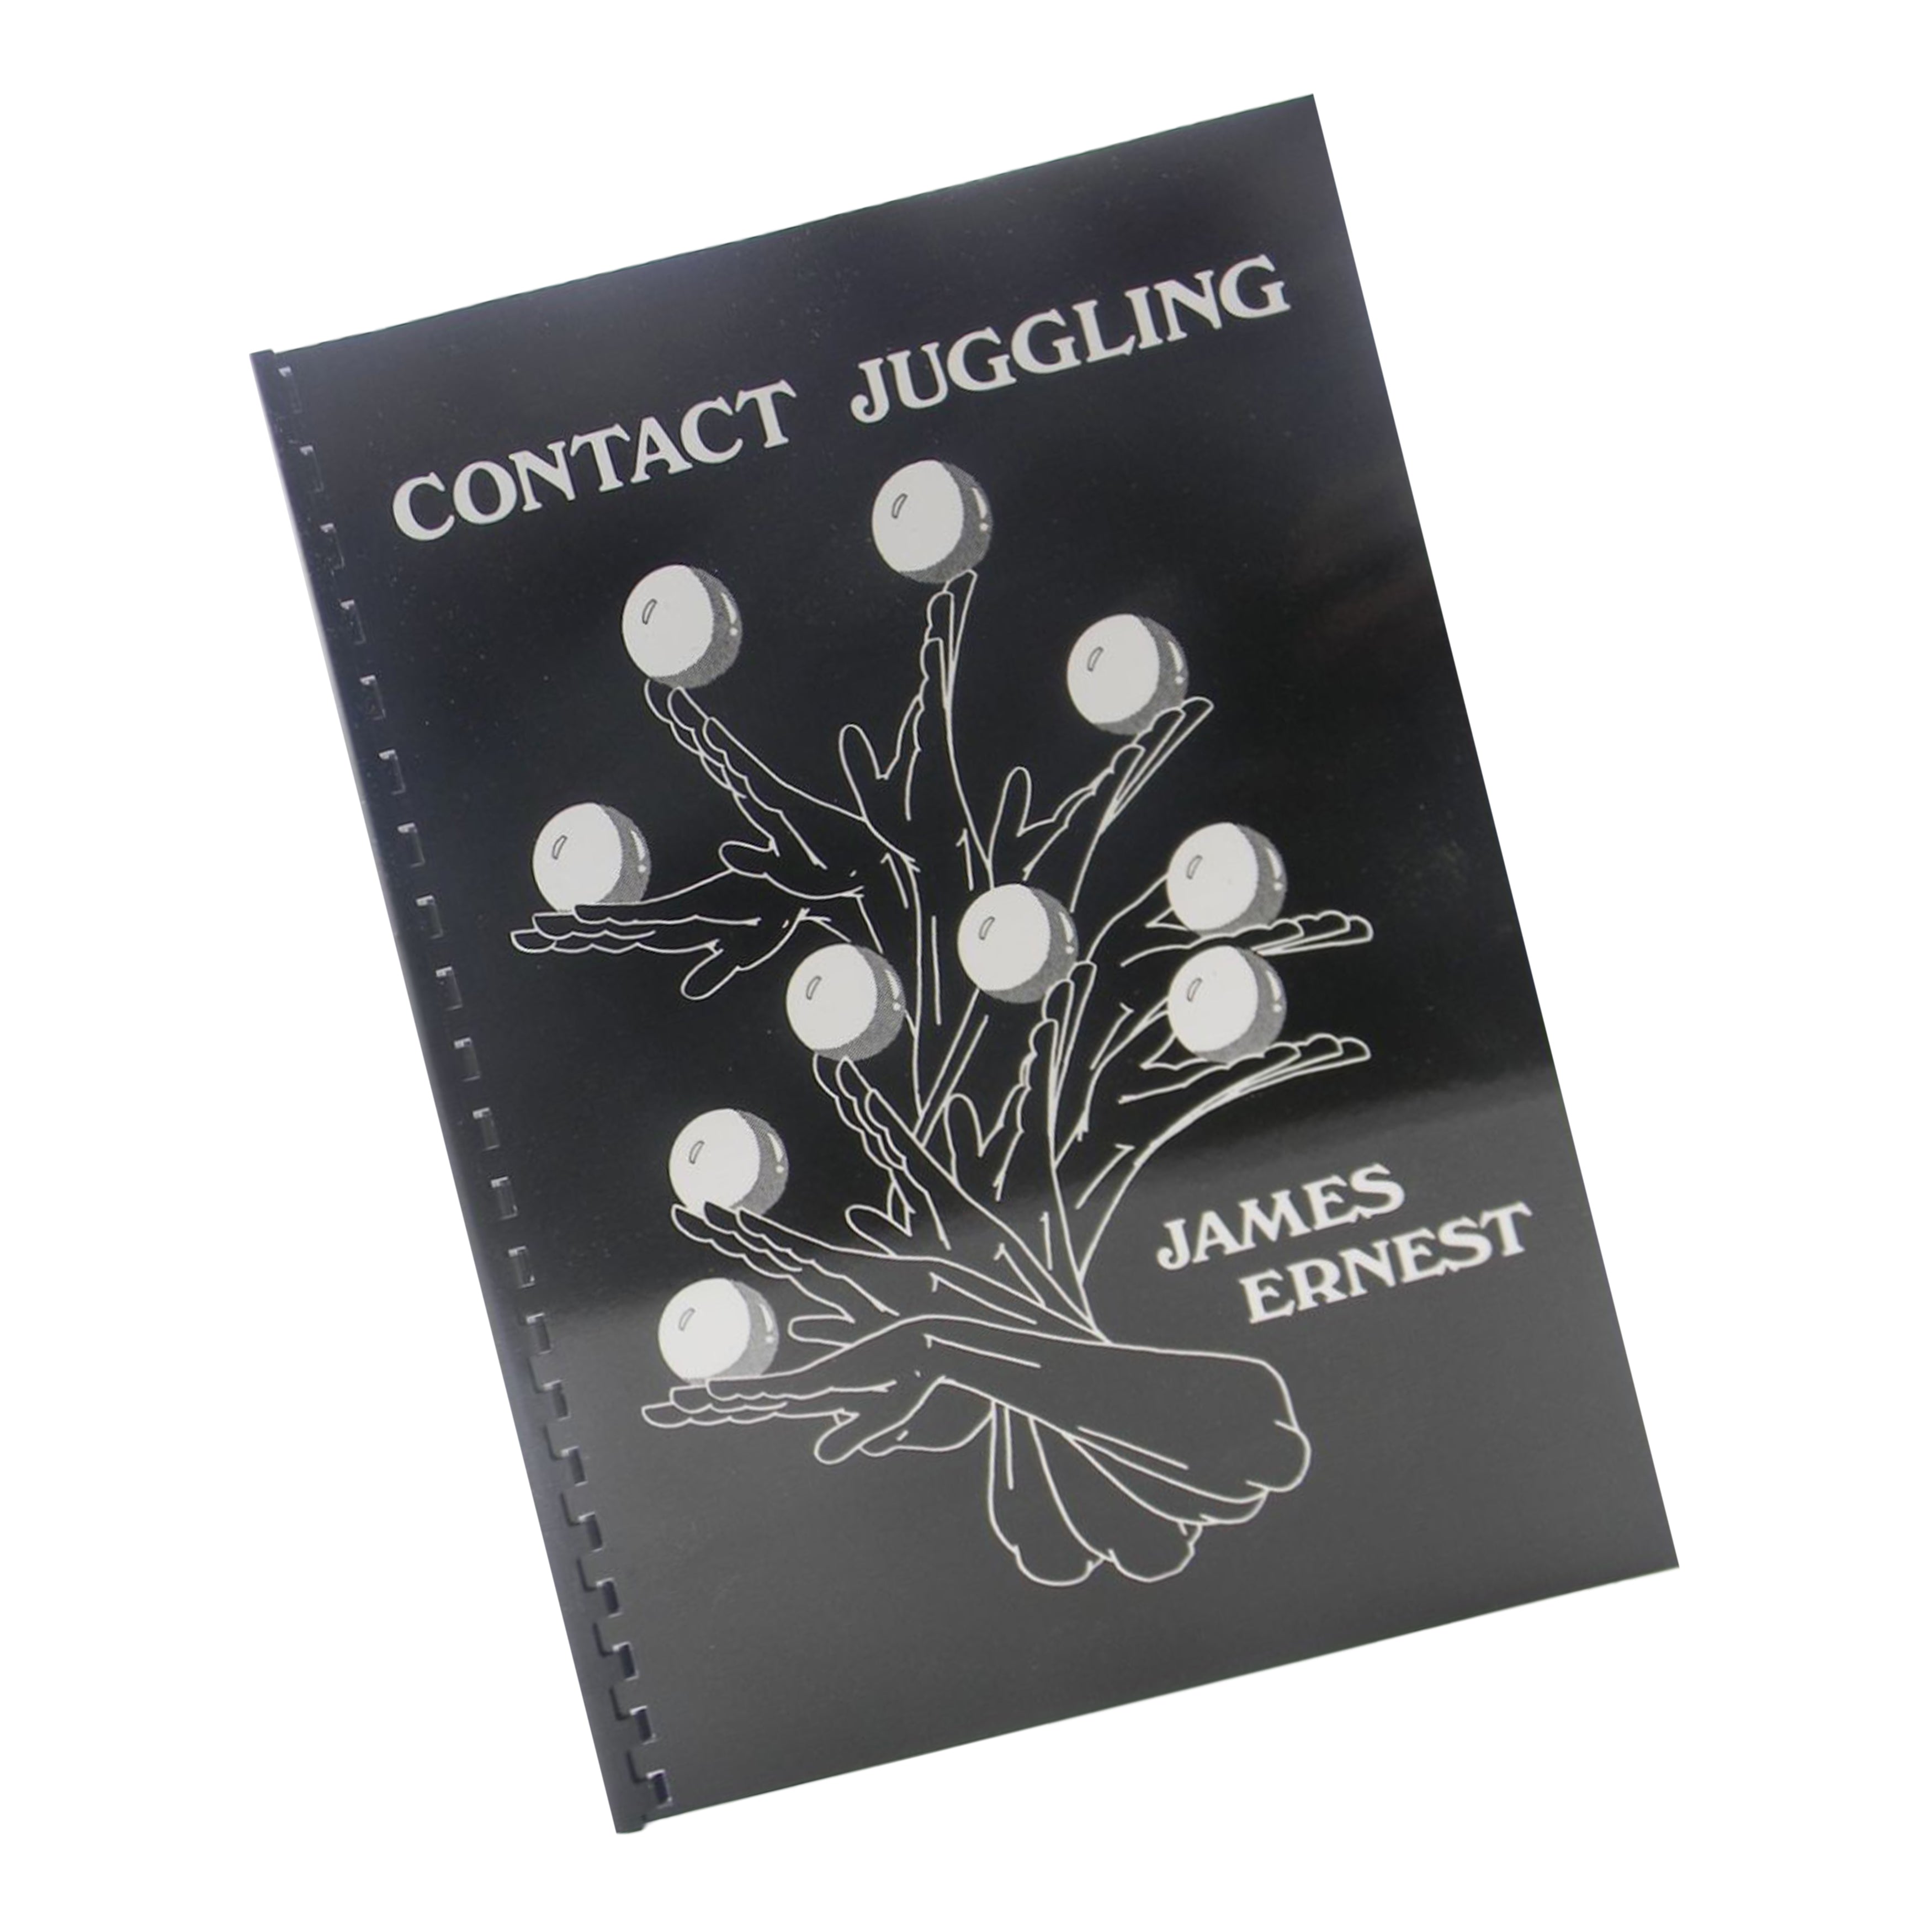 Contact Juggling Book by James Ernest